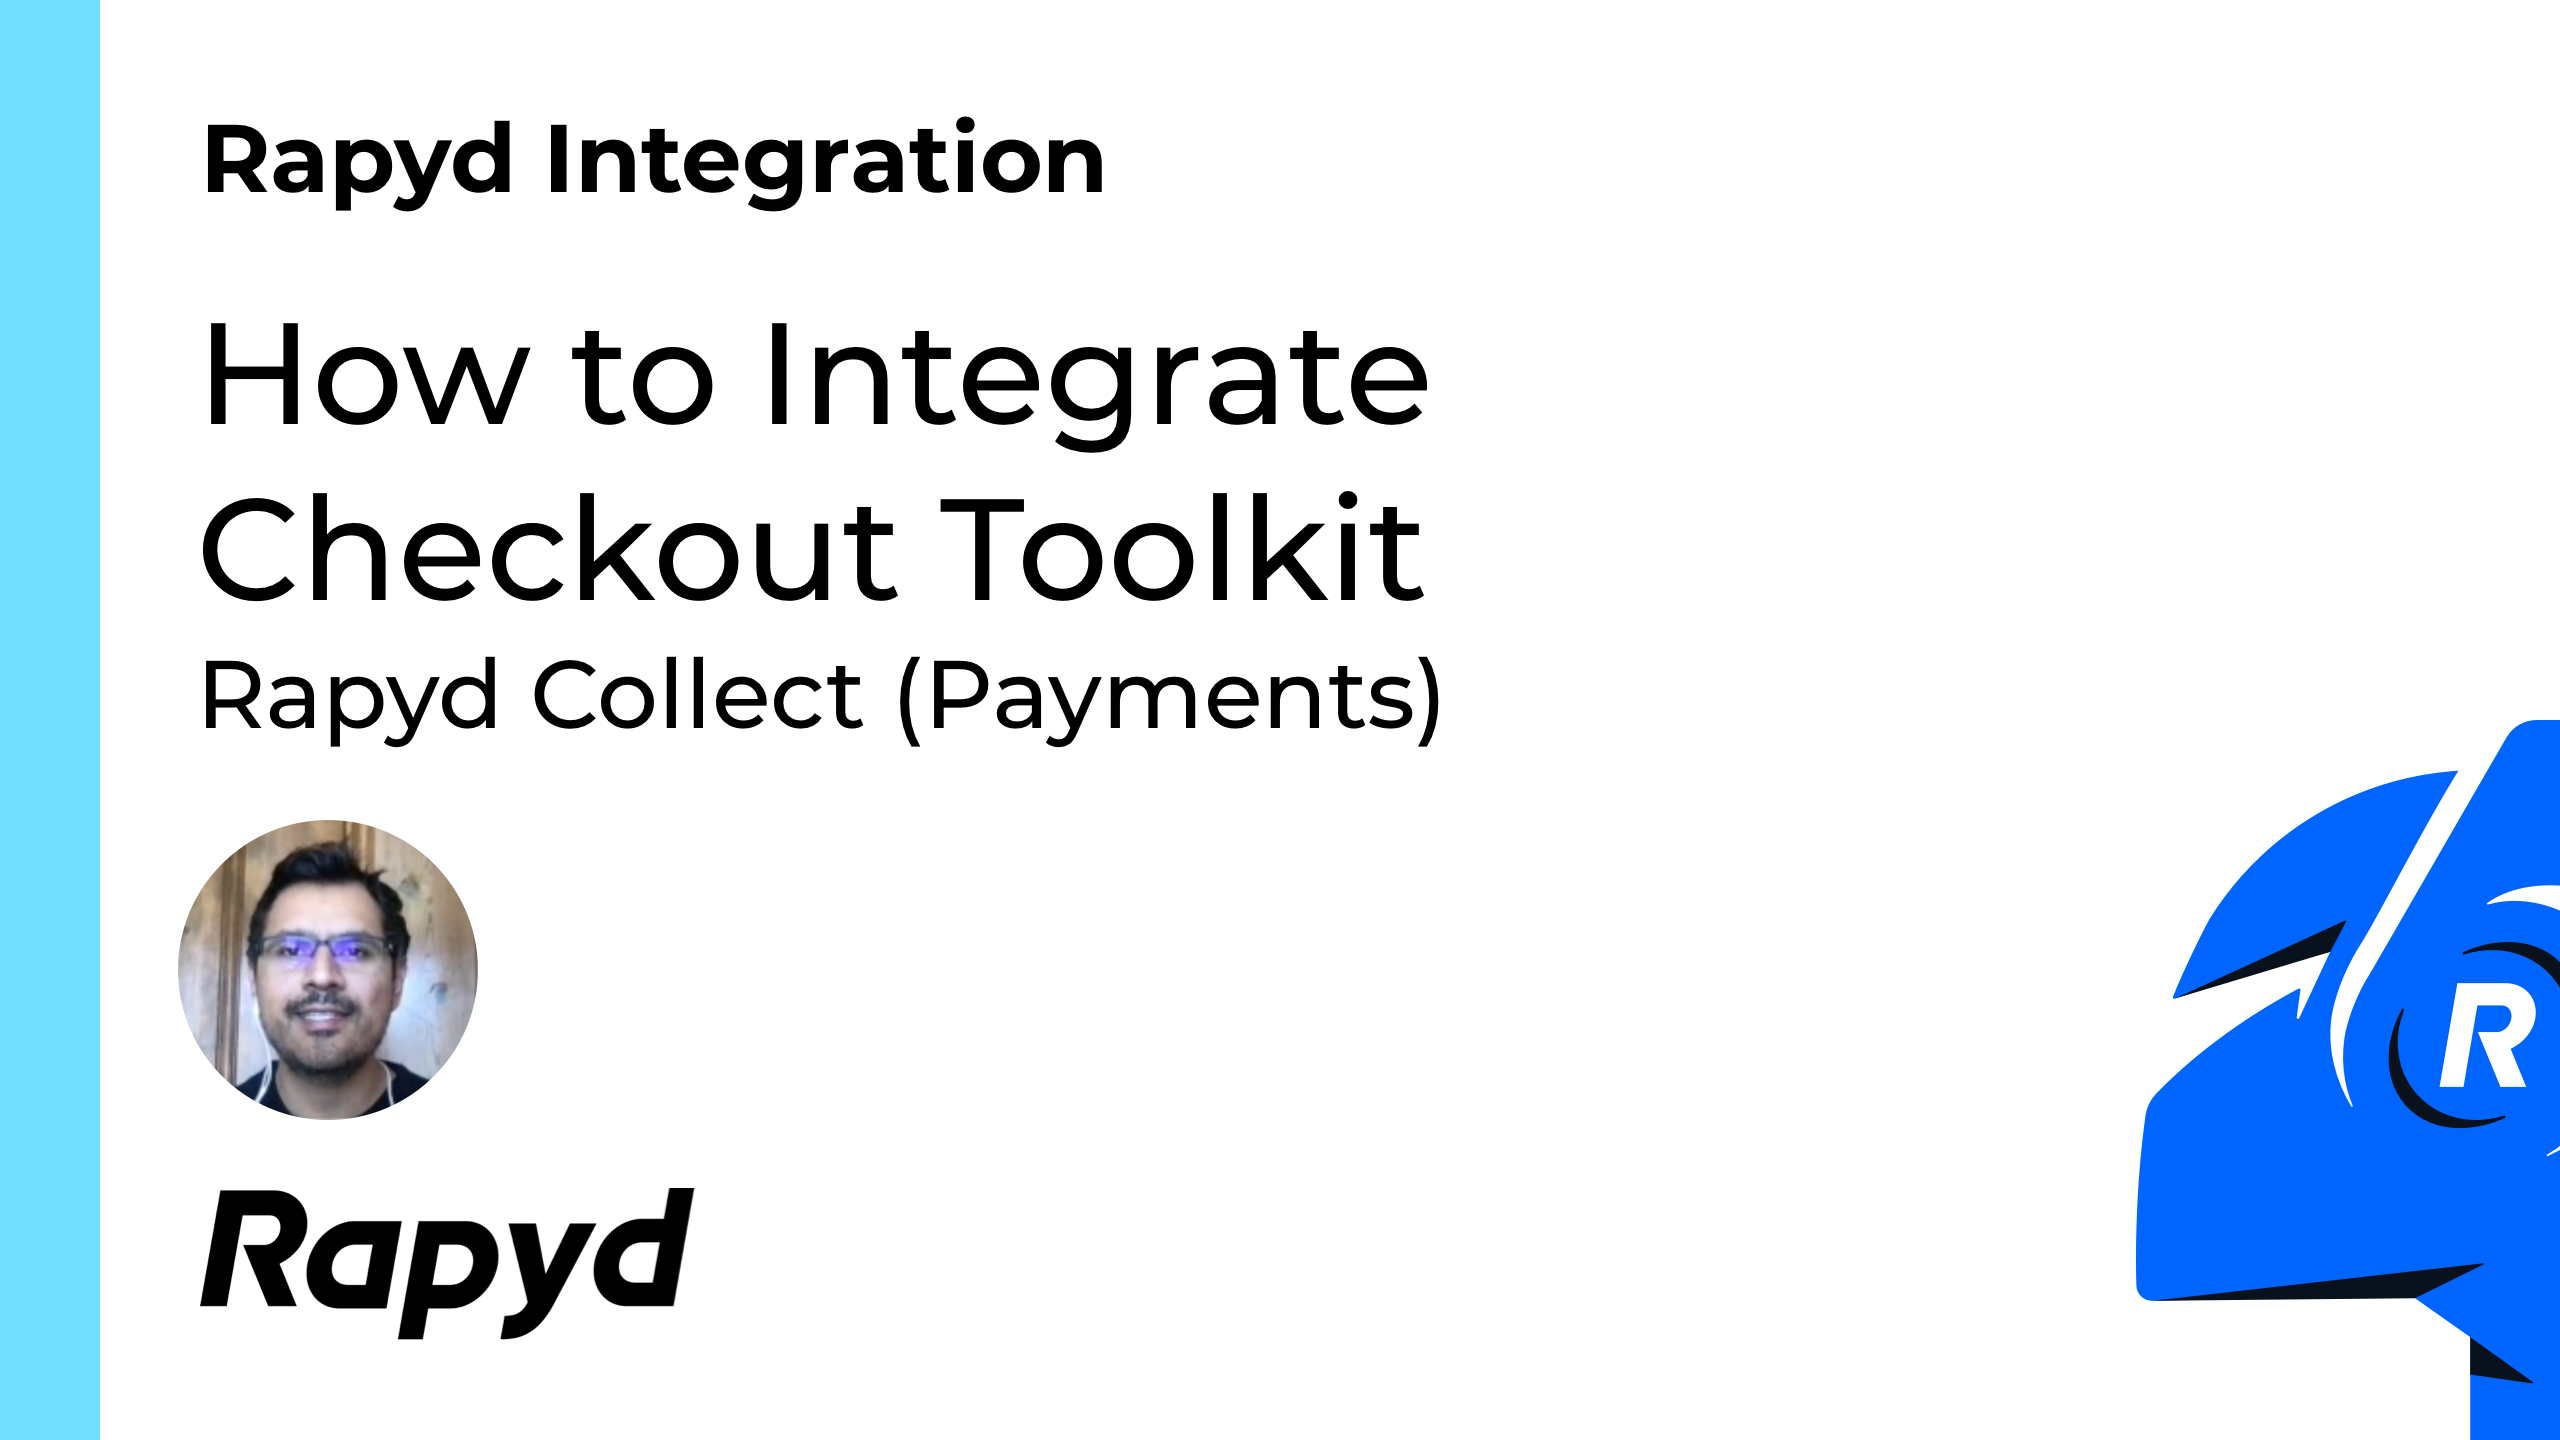 thumbnail of video link for youtube video showing rapyd checkout toolkit video